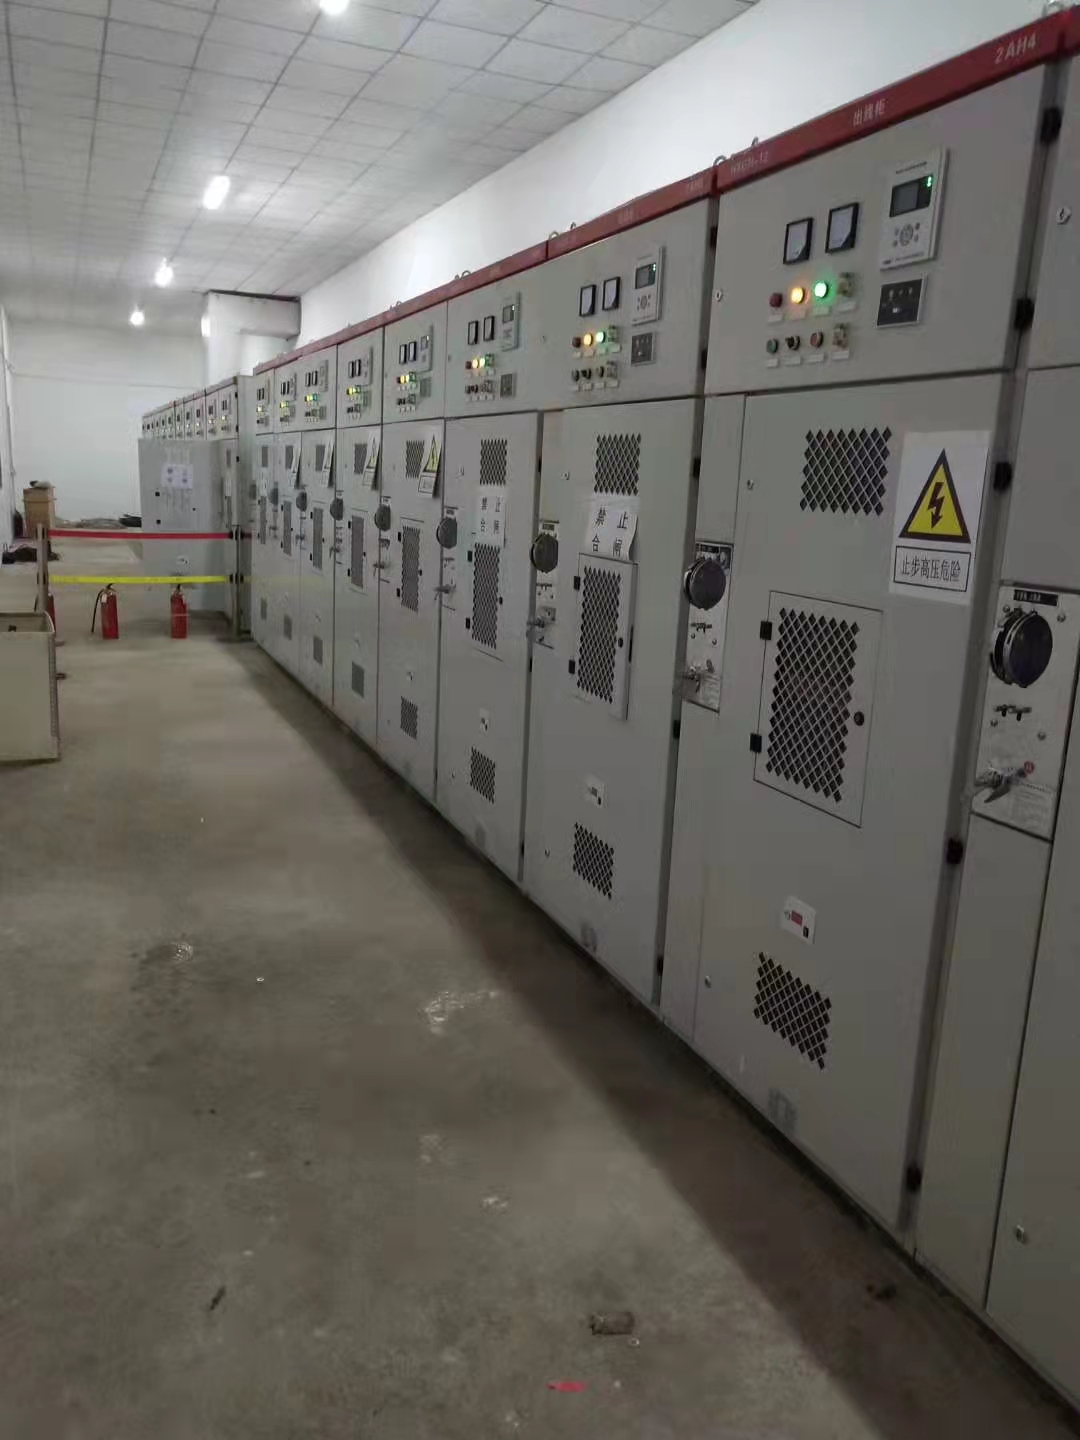 Custom switchgear wholesaler in China-SPL- power transformer,electrical transformer,Combined compact substation,Metalclad AC Enclosed Switchgear,Low Voltage Switchgear,Indoor AC Metal Clad Intermediate Switchgear,Non-encapsulated Dry-type Power Transformer,Unwrapped coil dry-type transformer,Epoxy resin cast silicon steel sheet dry-type transformer,Epoxy resin cast amorphous alloy dry-type transformer,Amorphous alloy oil-immersed power transformer,Silicon steel sheet oil-immersed power,electric transformer,Distribution Transformer,voltage transformer,step-down transformer,reducing transformer,low-loss power transformer,loss power transformer,Oil-type Transformer,Oil Distribution Transformer,Transformer-Oil-lmmersed,Oil Transformer,Oil Immersed Transformer,three phase oil immersed power transformer,oil filled electrical transformer,Sealed amorphous alloy power transformer,Dry Type Transformer,dry Transformer,Cast Resin Dry Type Transformer,dry-type transformer,resin-casting type transformer,resinated dry type transformer,CRDT,Unwrapped coil power transformer,three phase dry Transformer,articulated unit substation,AS,Modular substation,transformer substation,electric substation,Power Sub-station,Preinstalled substation,YBM,prefabricated substation,Distribution Substation,compact substation,MV power stations,LV power stations,HV power stations,Switchgear Cabinet,MV Switchgear Cabinet,LV Switchgear Cabinet,HV Switchgear Cabinet,pull-out switch cabinet,Ac metal closed ring network switchgear,Indoor metal armored central switchgear,Box-type substation,custom transformers,customized transformers,Metal enclosed electrical switchgear,LV Switchgear Cabinet,